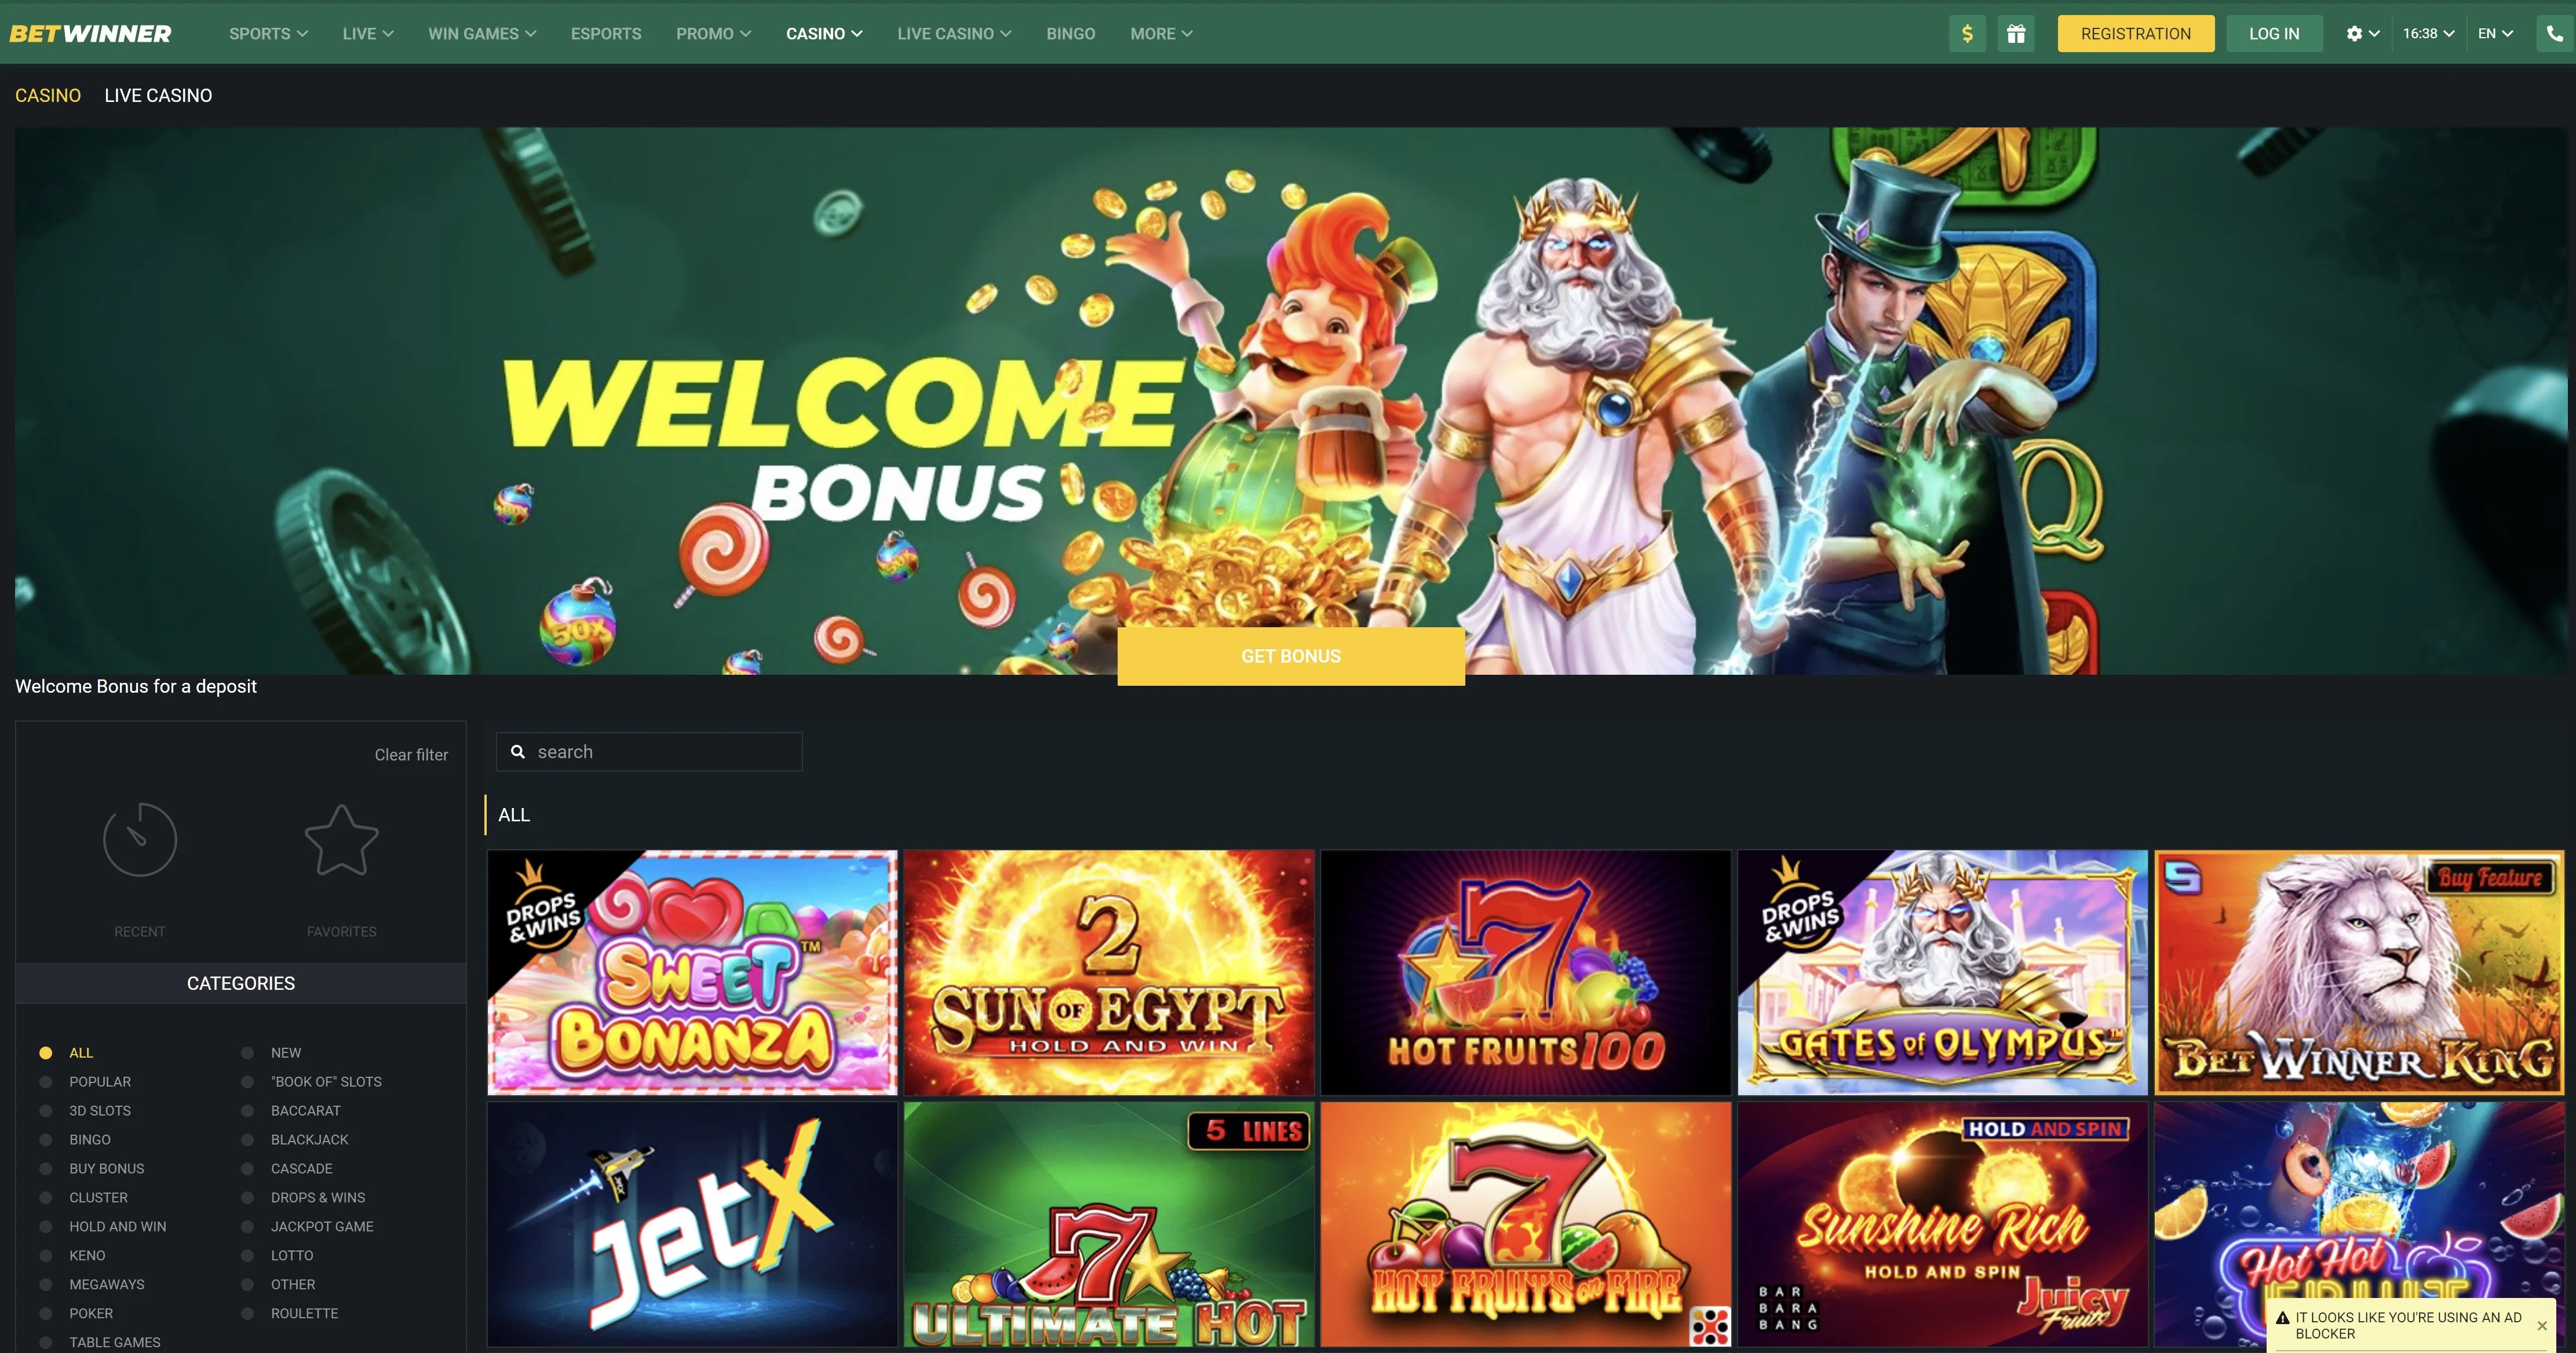 Betwinner: The Best Place To Play Casino Games For Indian Players